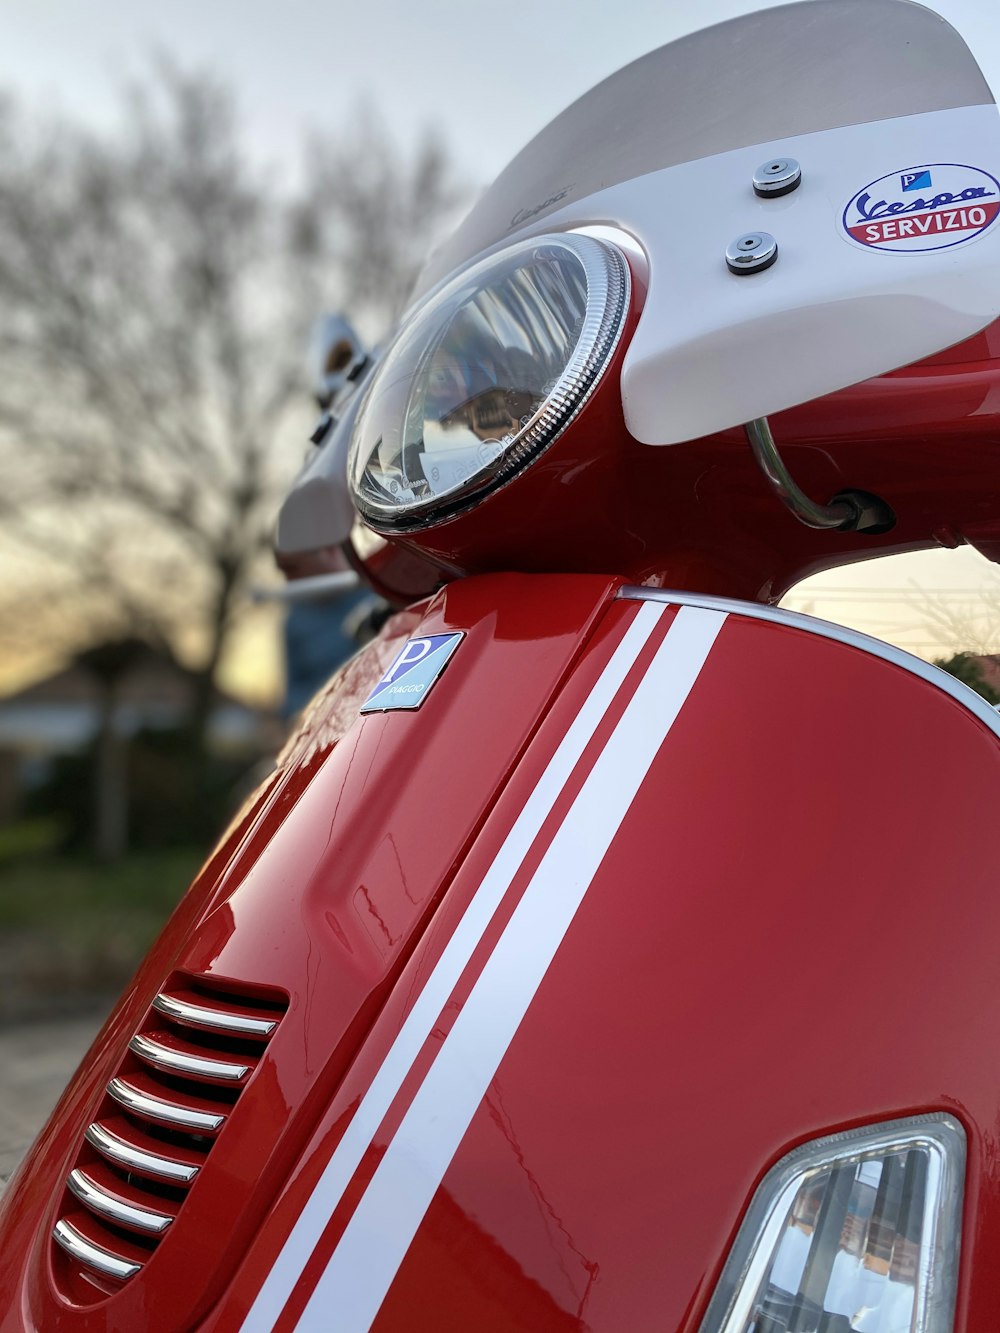 red and white motorcycle in tilt shift lens